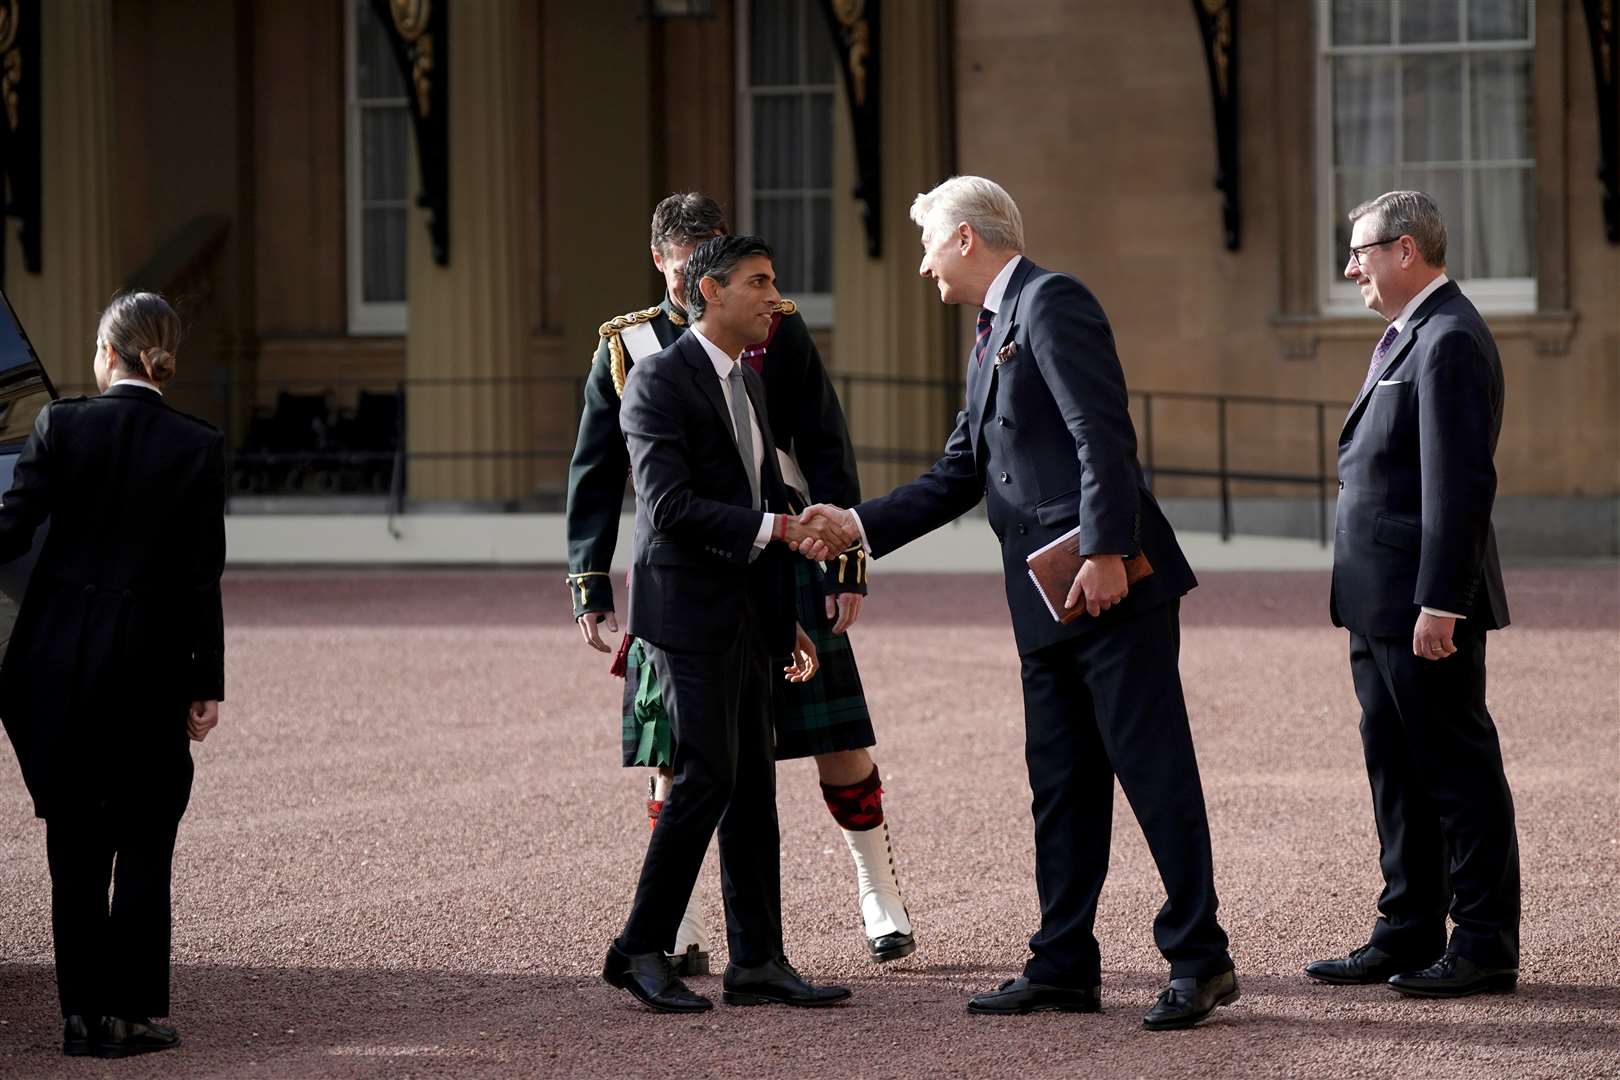 Rishi Sunak arrives at Buckingham Palace in October 2022 for an audience with the King where he was invited to become prime minister (Yui Mok/PA)